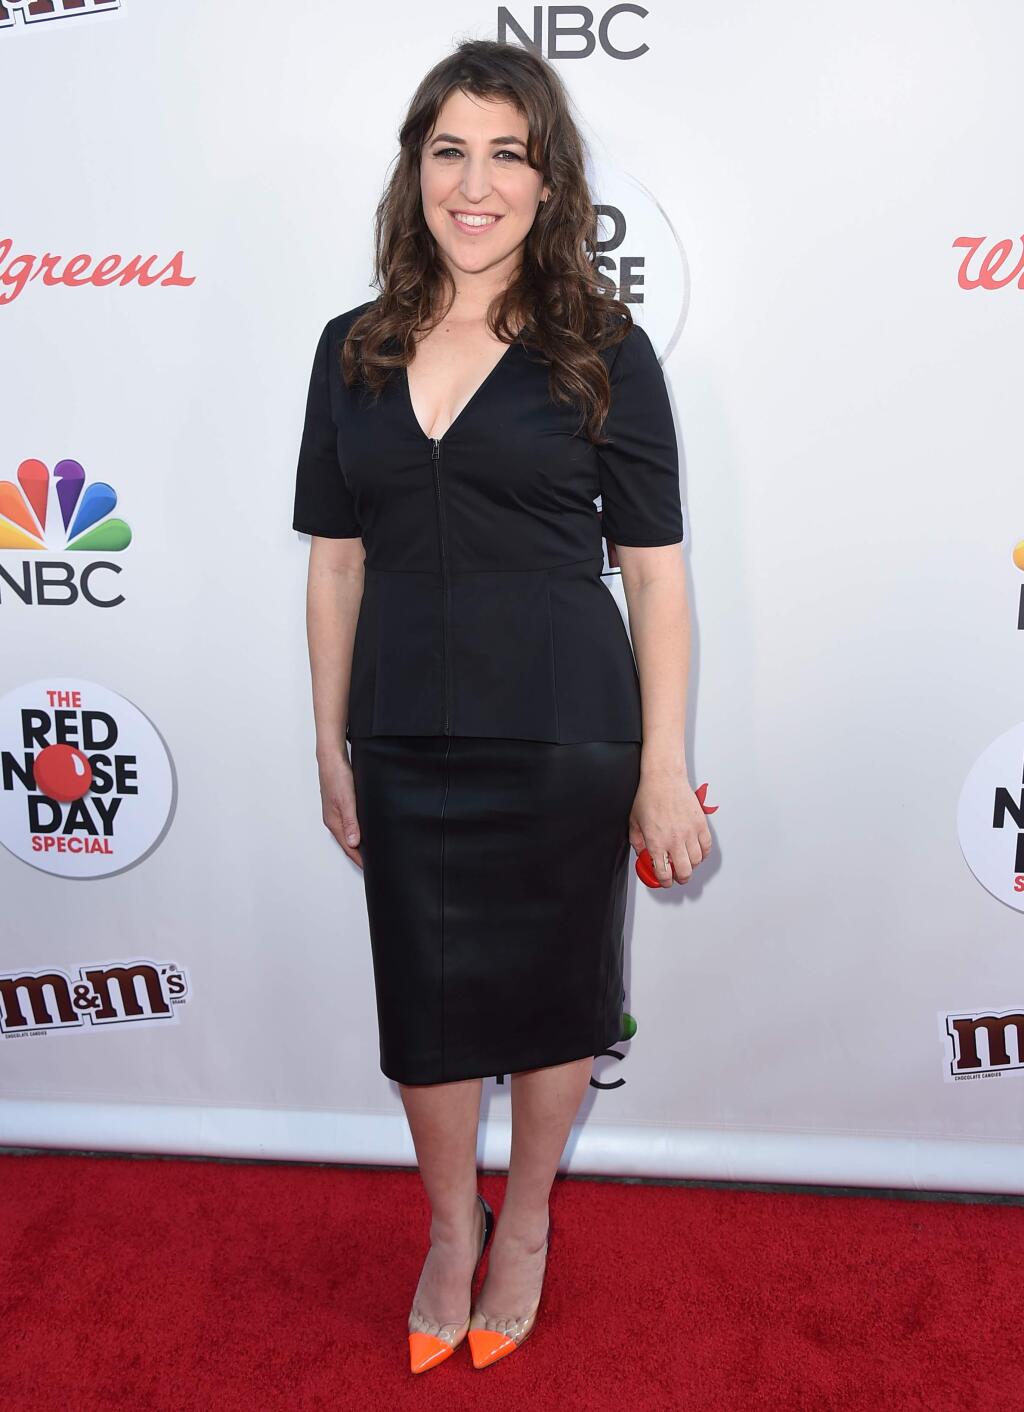 Mayim Bialik arrives at Red Nose Day at Universal Studios on Thursday, May 26, 2016, in Universal City, Calif. (Photo by Jordan Strauss/Invision/AP)